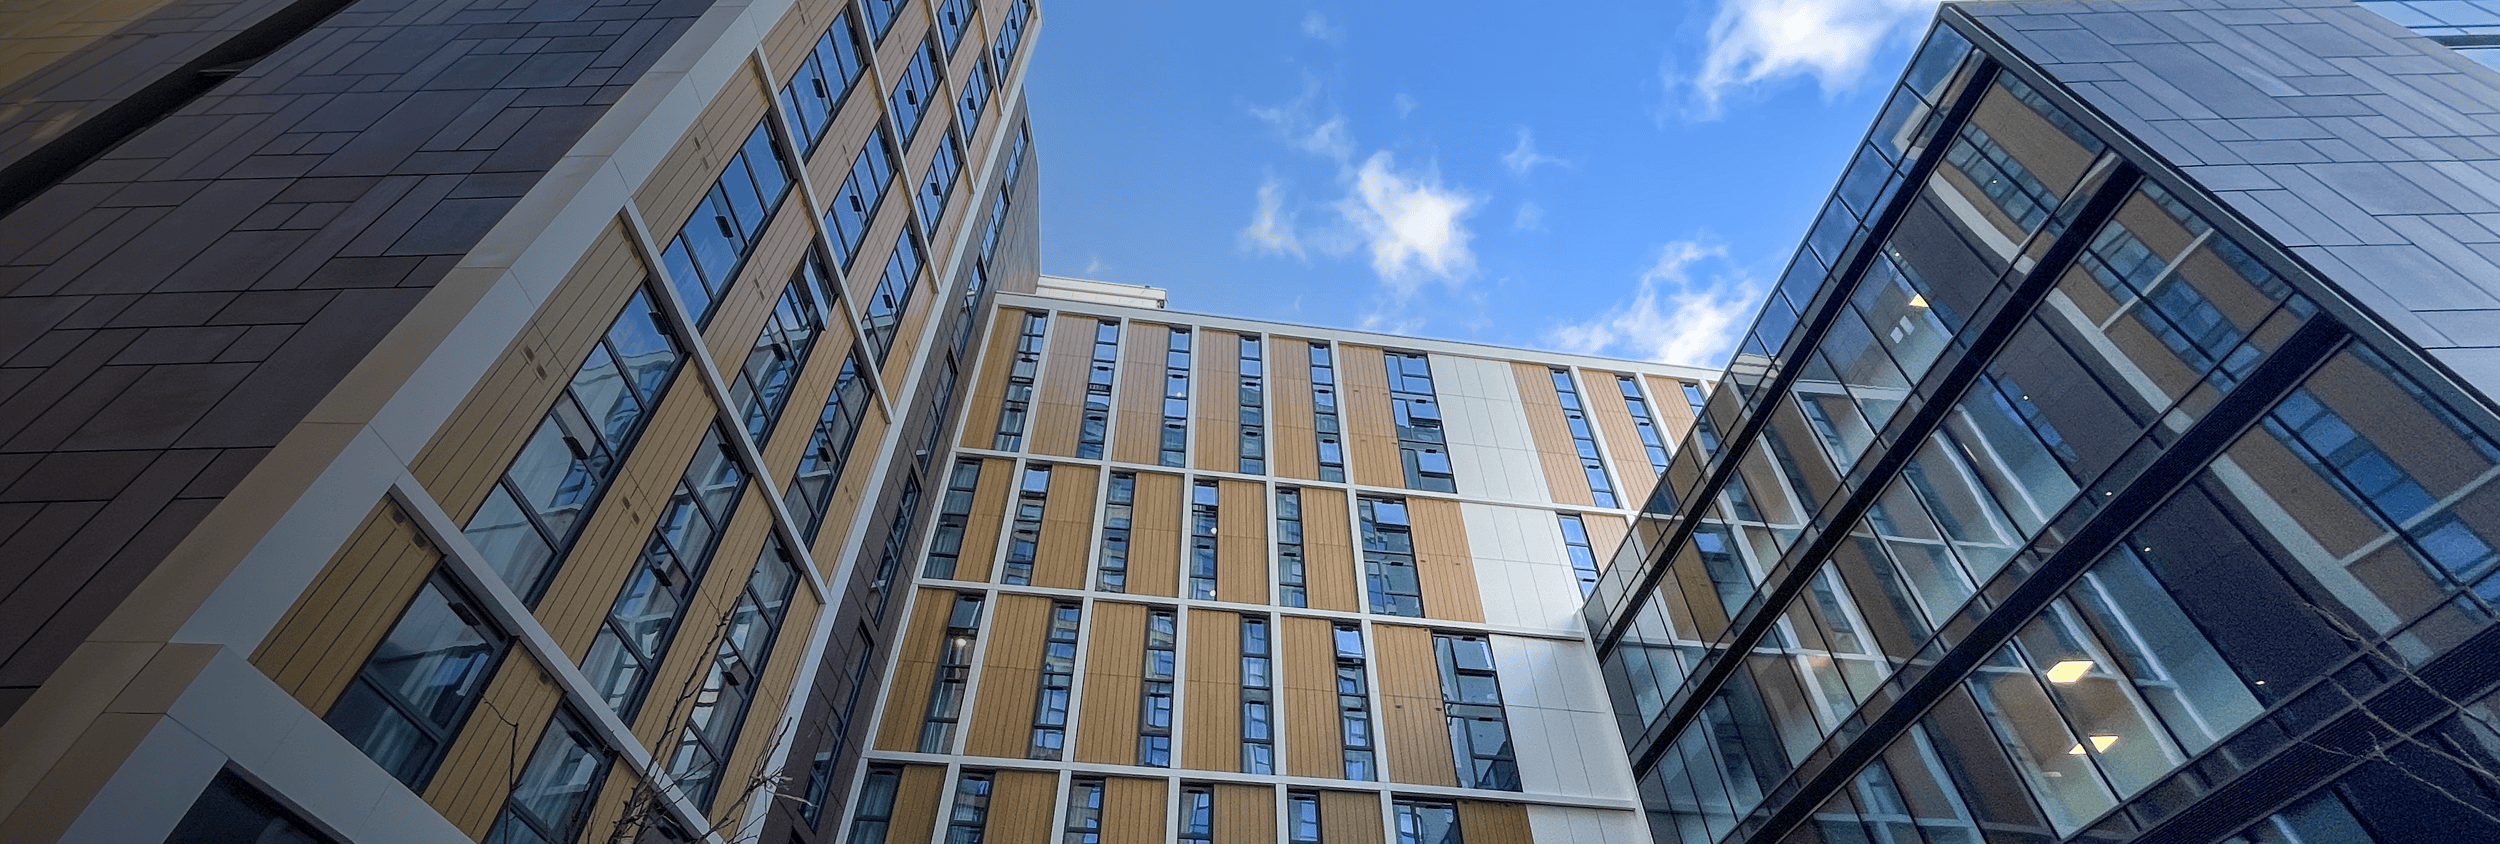 Student Accommodation Façade Replacement, Bournemouth